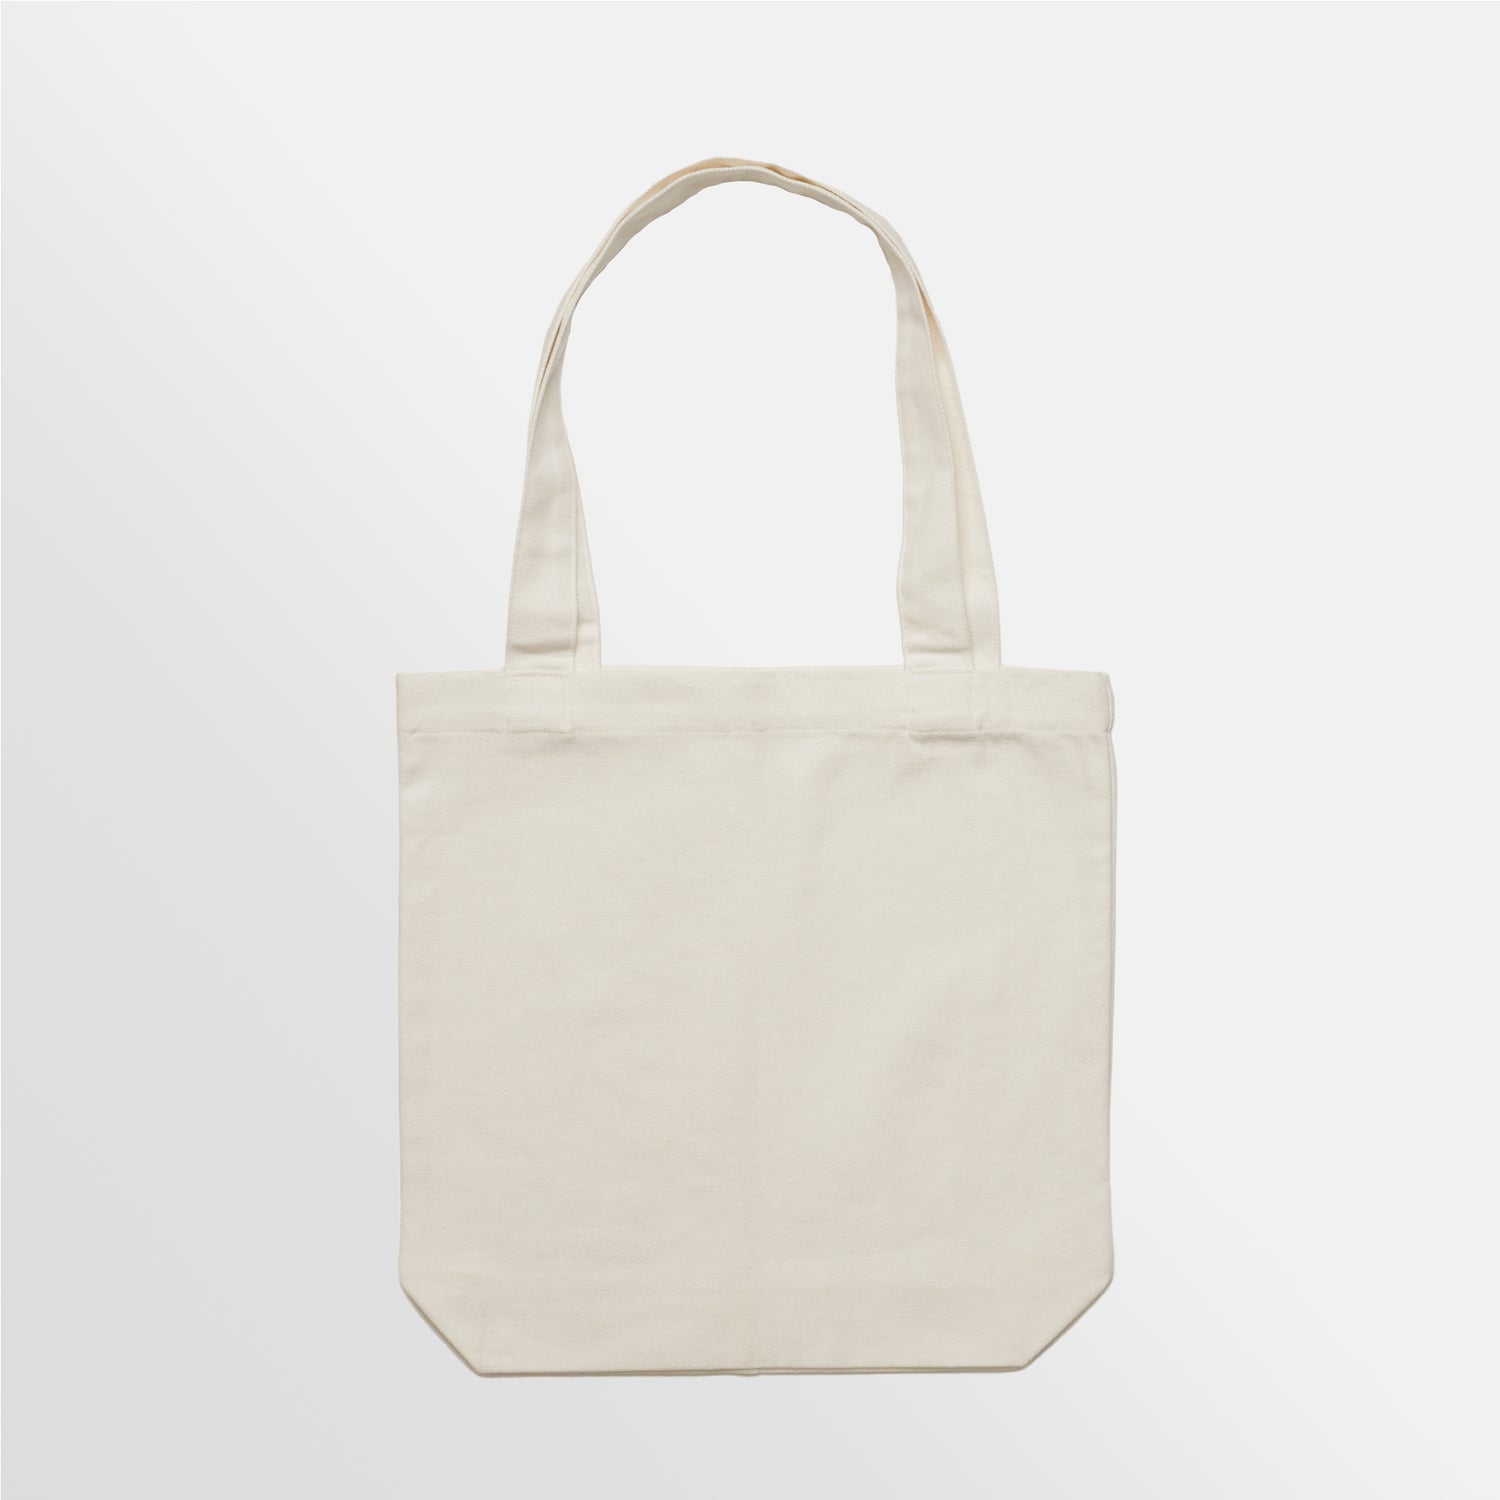 Carrie Tote - On Request